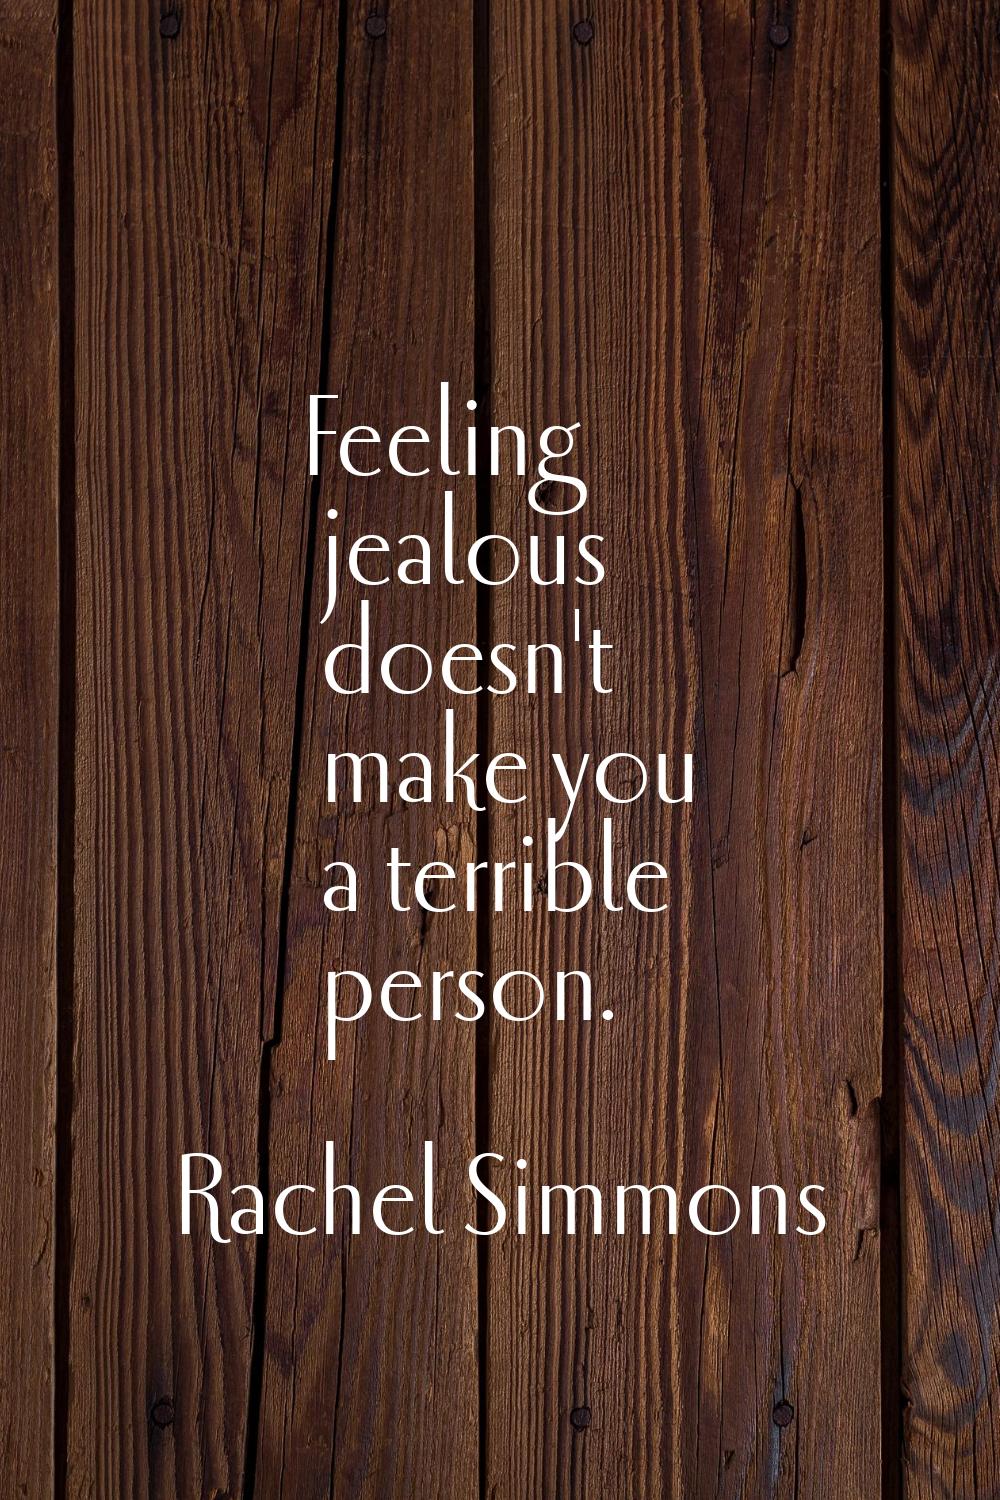 Feeling jealous doesn't make you a terrible person.